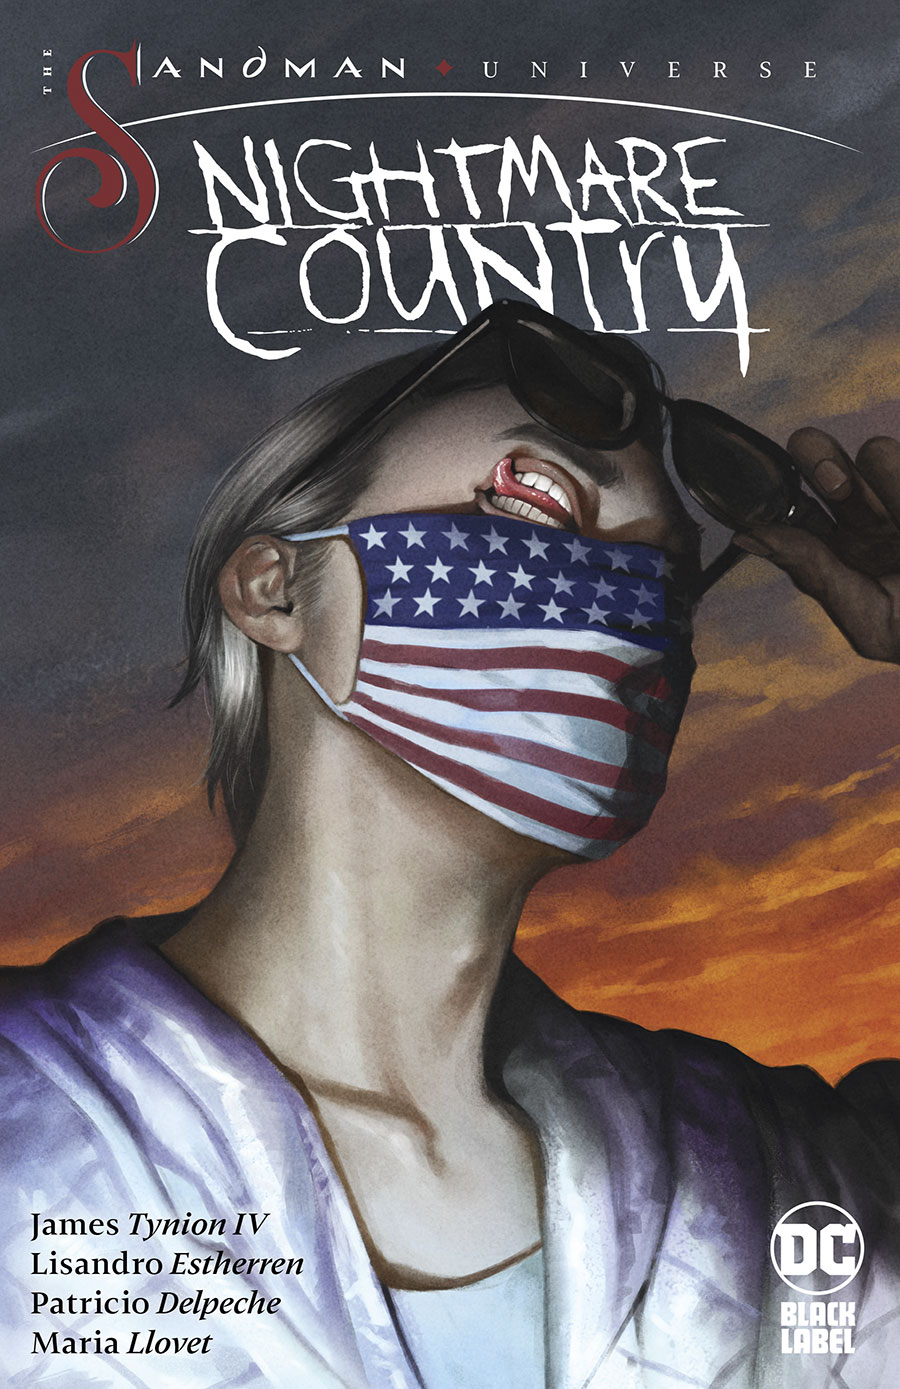 Sandman Universe Nightmare Country Vol 1 TP Direct Market Exclusive Variant Cover